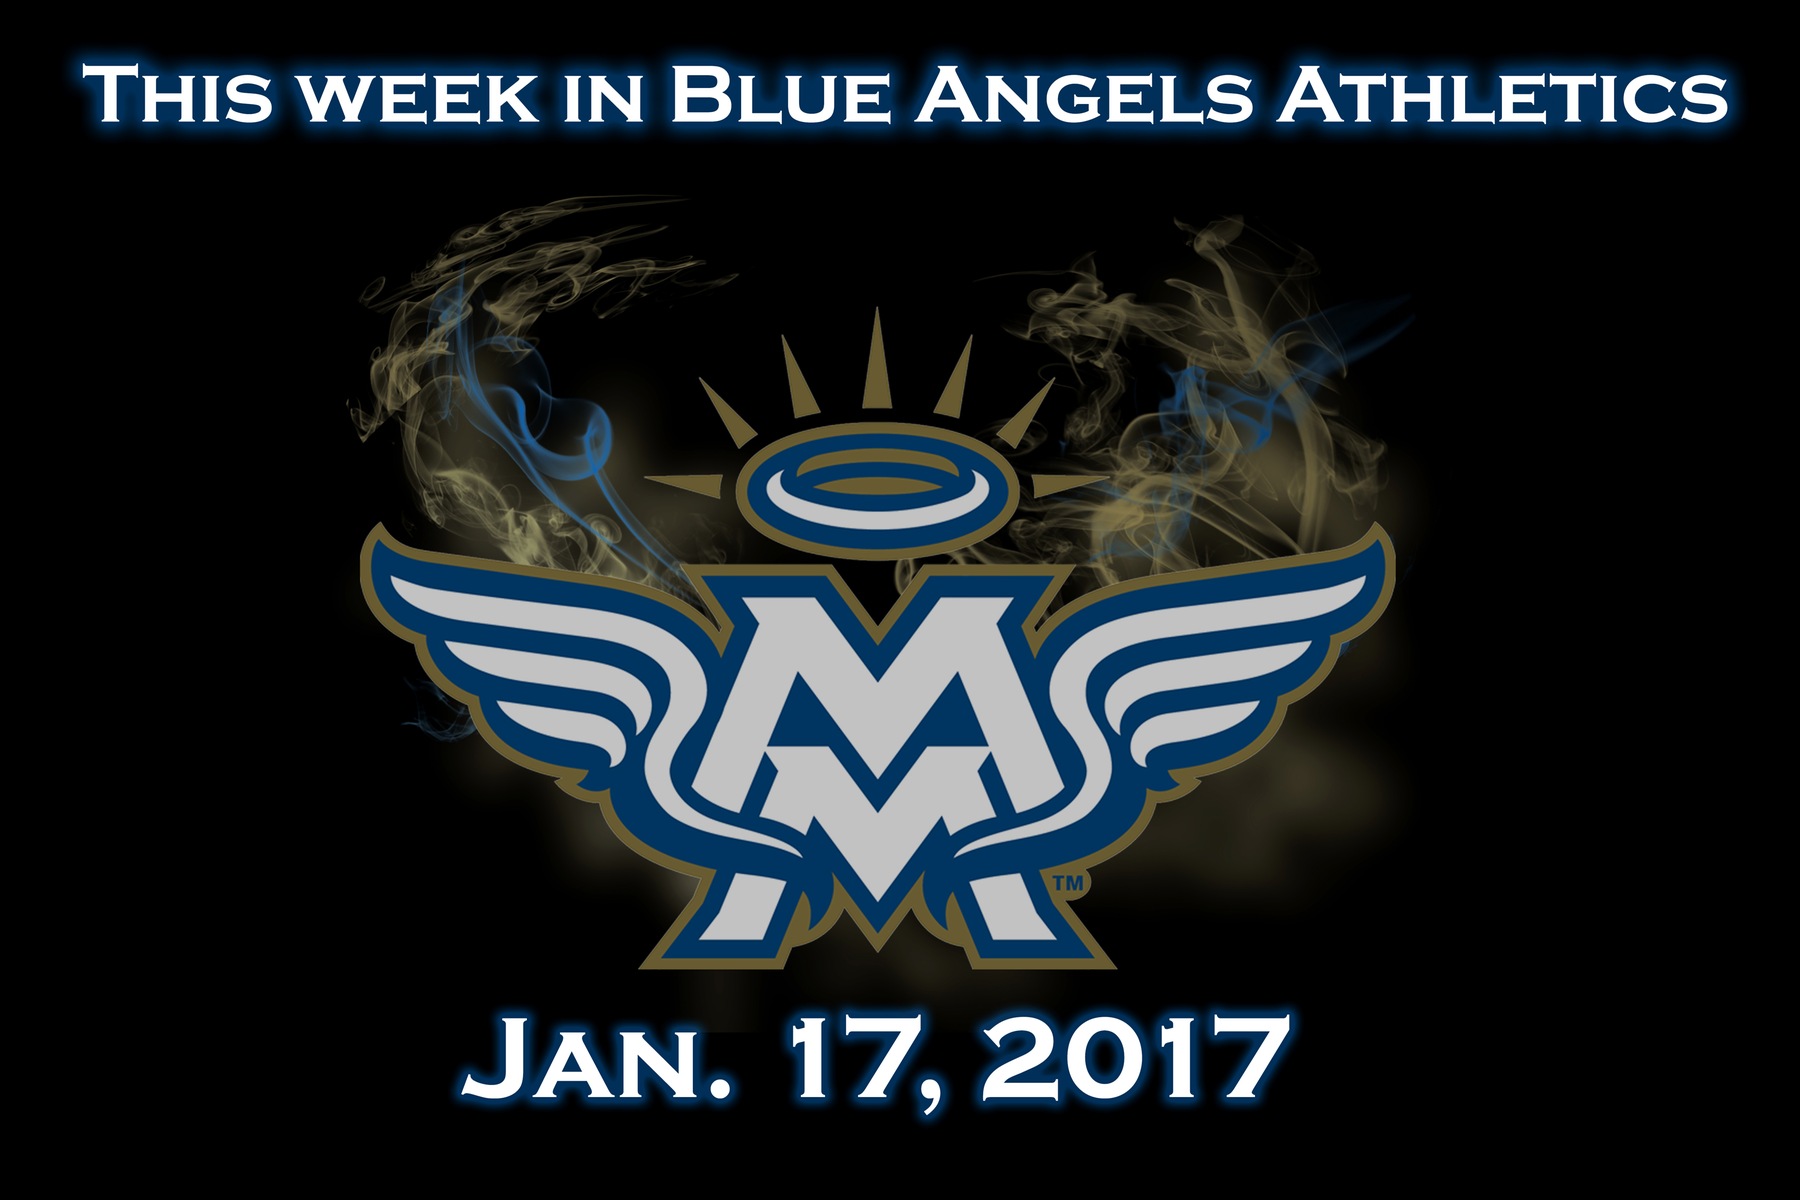 Blue Angels Weekly Preview 01-17-17